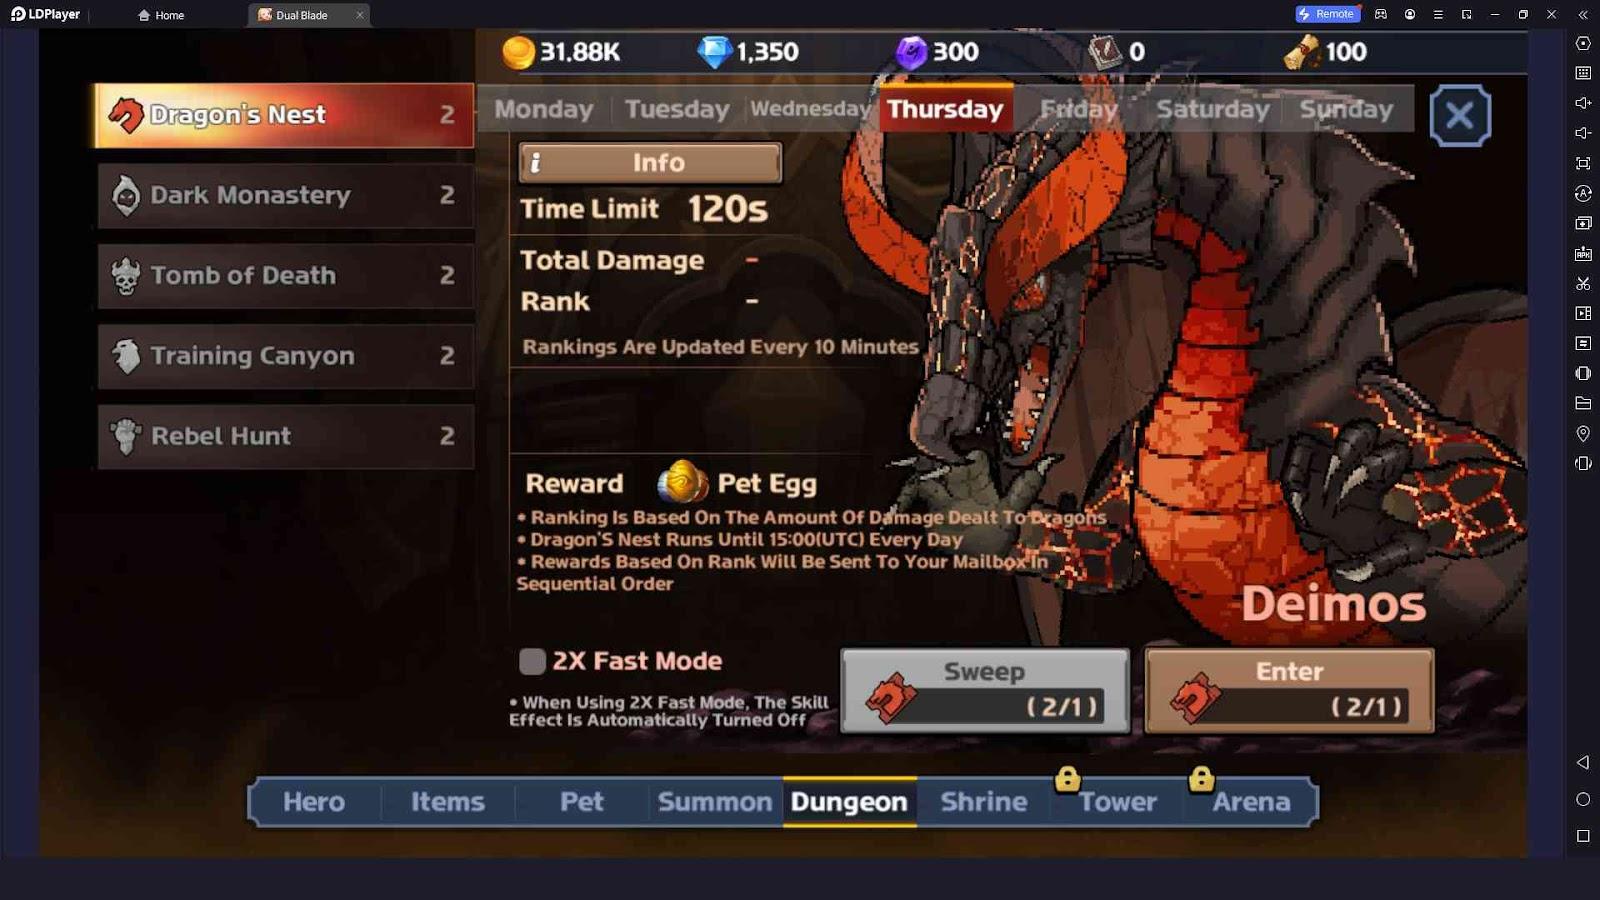 Take Part in Dungeon Battles and Earn More Rewards